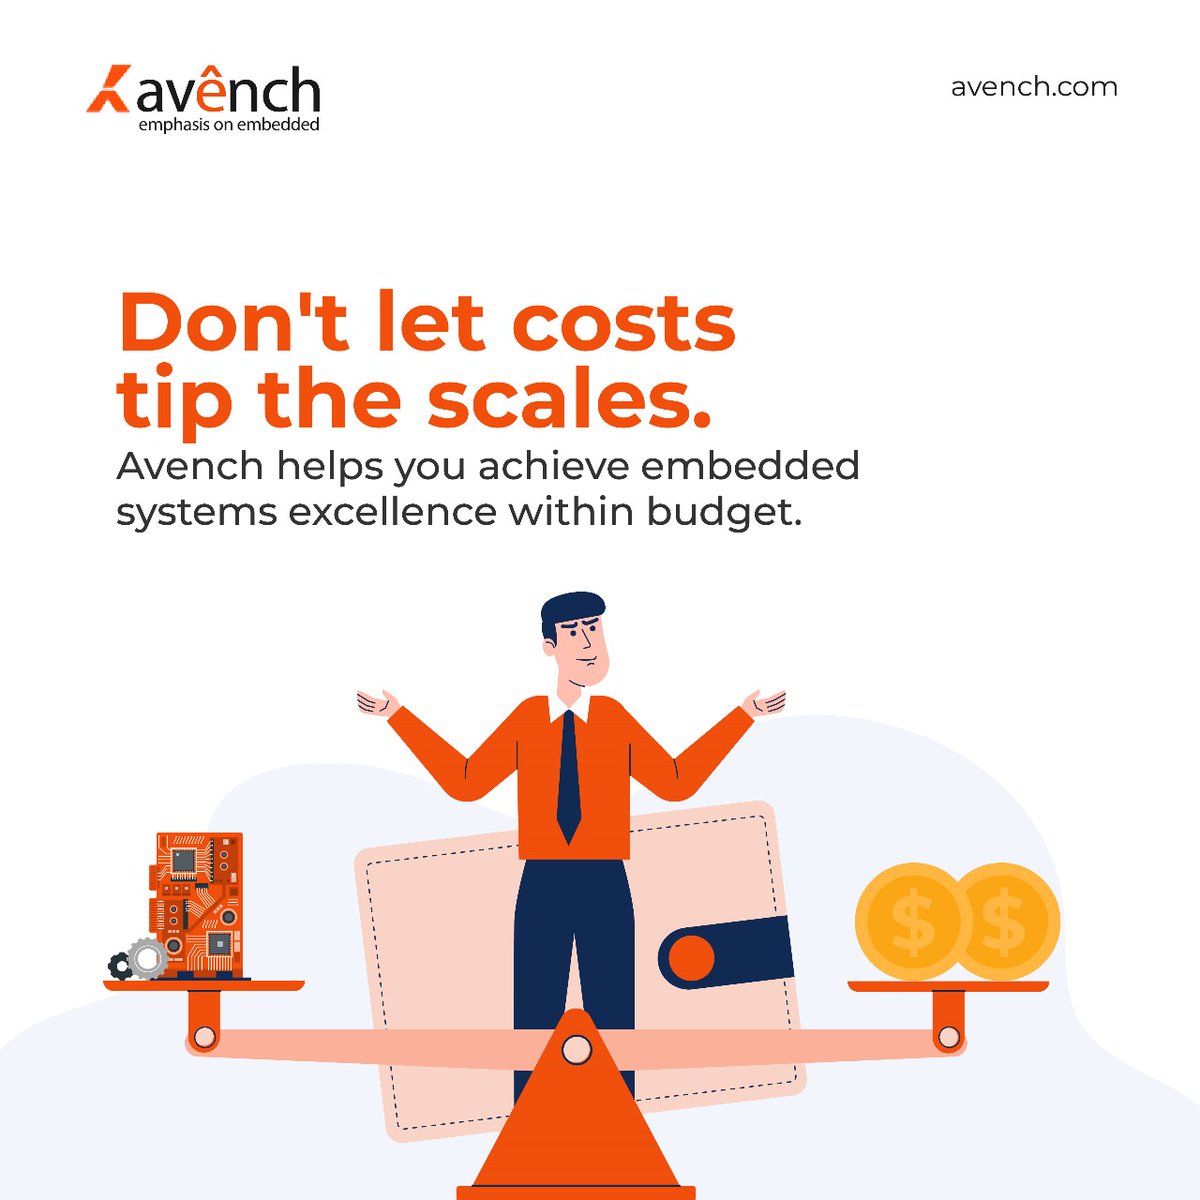 Keep embedded systems design costs in check with Avench: Feasibility assessments, value engineering, and clear communication ensure your project meets budget without sacrificing quality. avench.com #avenchsystem #embeddedsystems #IOTsystem #microcontrollers